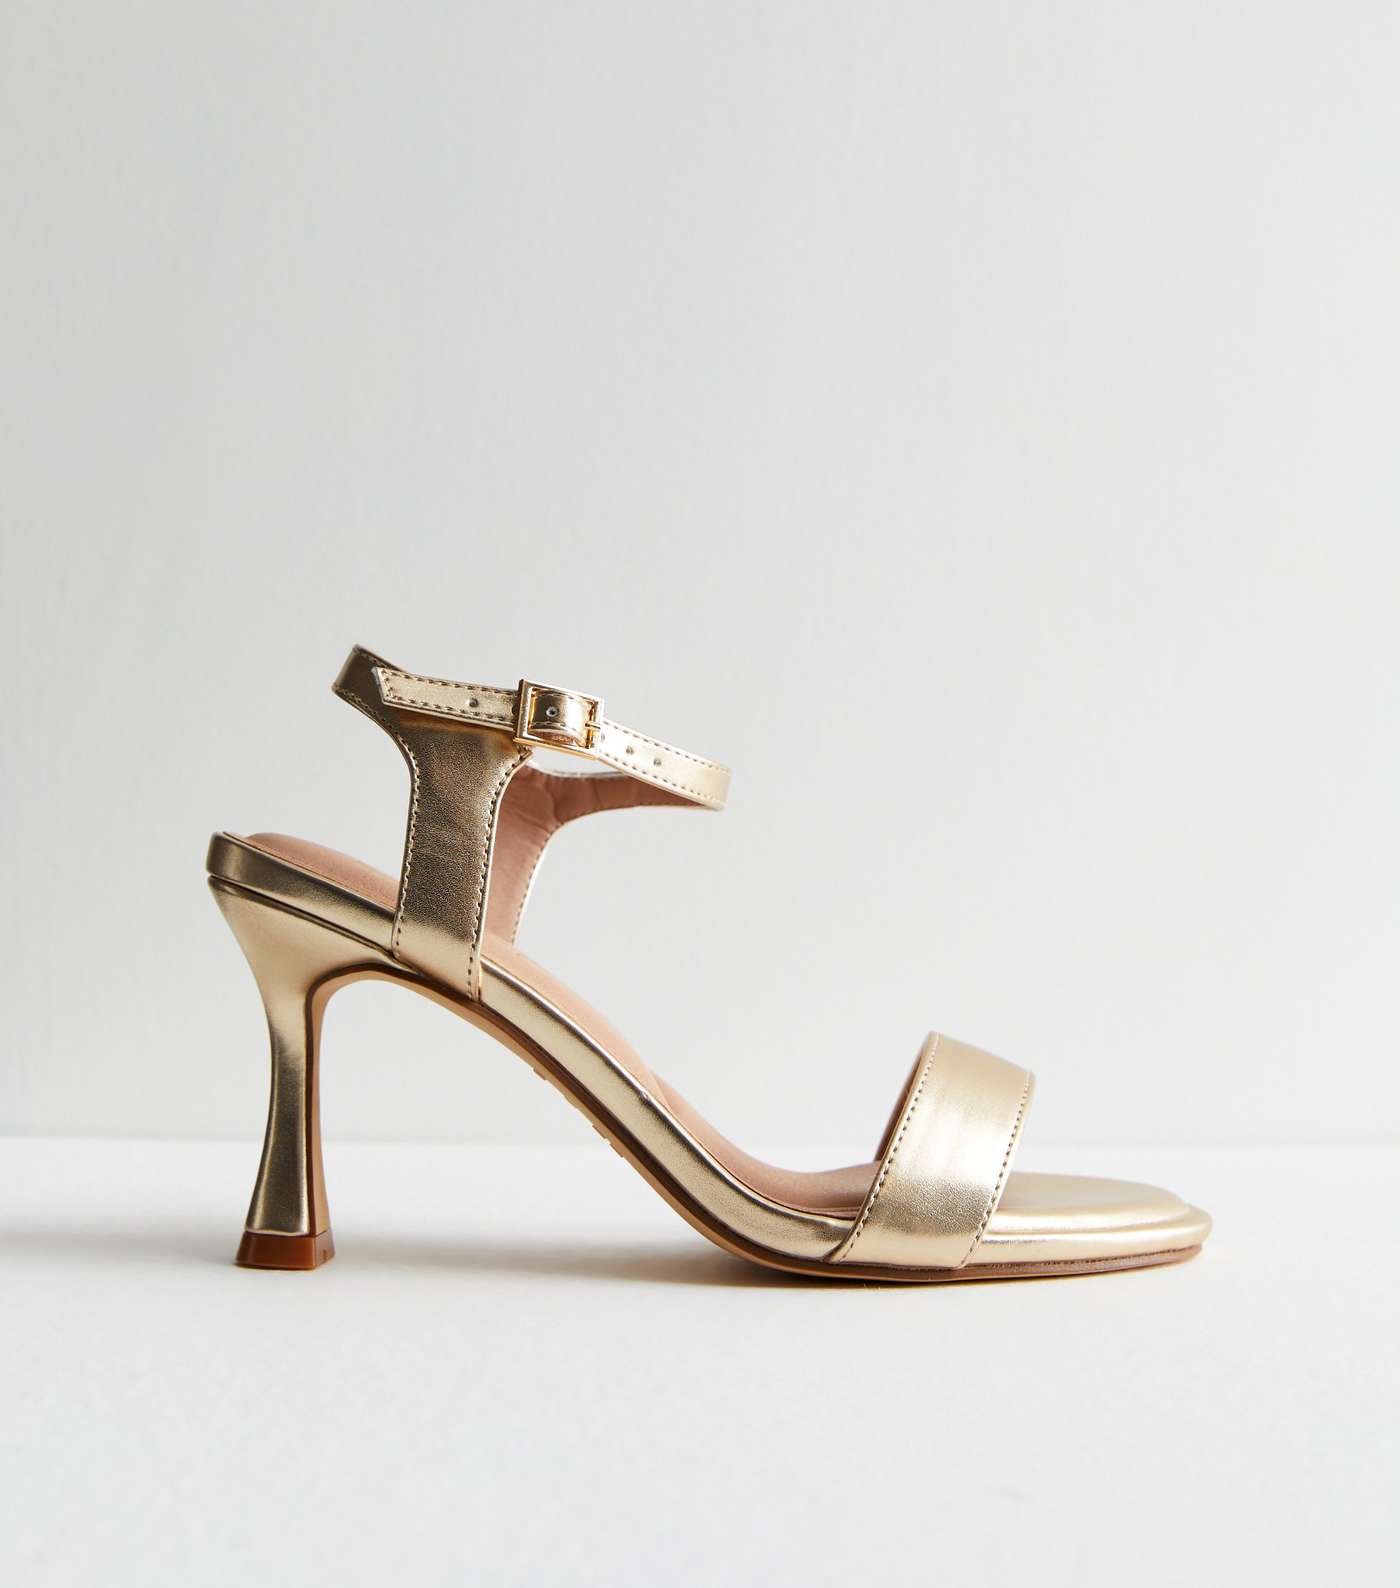 Gold Leather-Look 2 Part Stiletto Heel Sandals Image 3